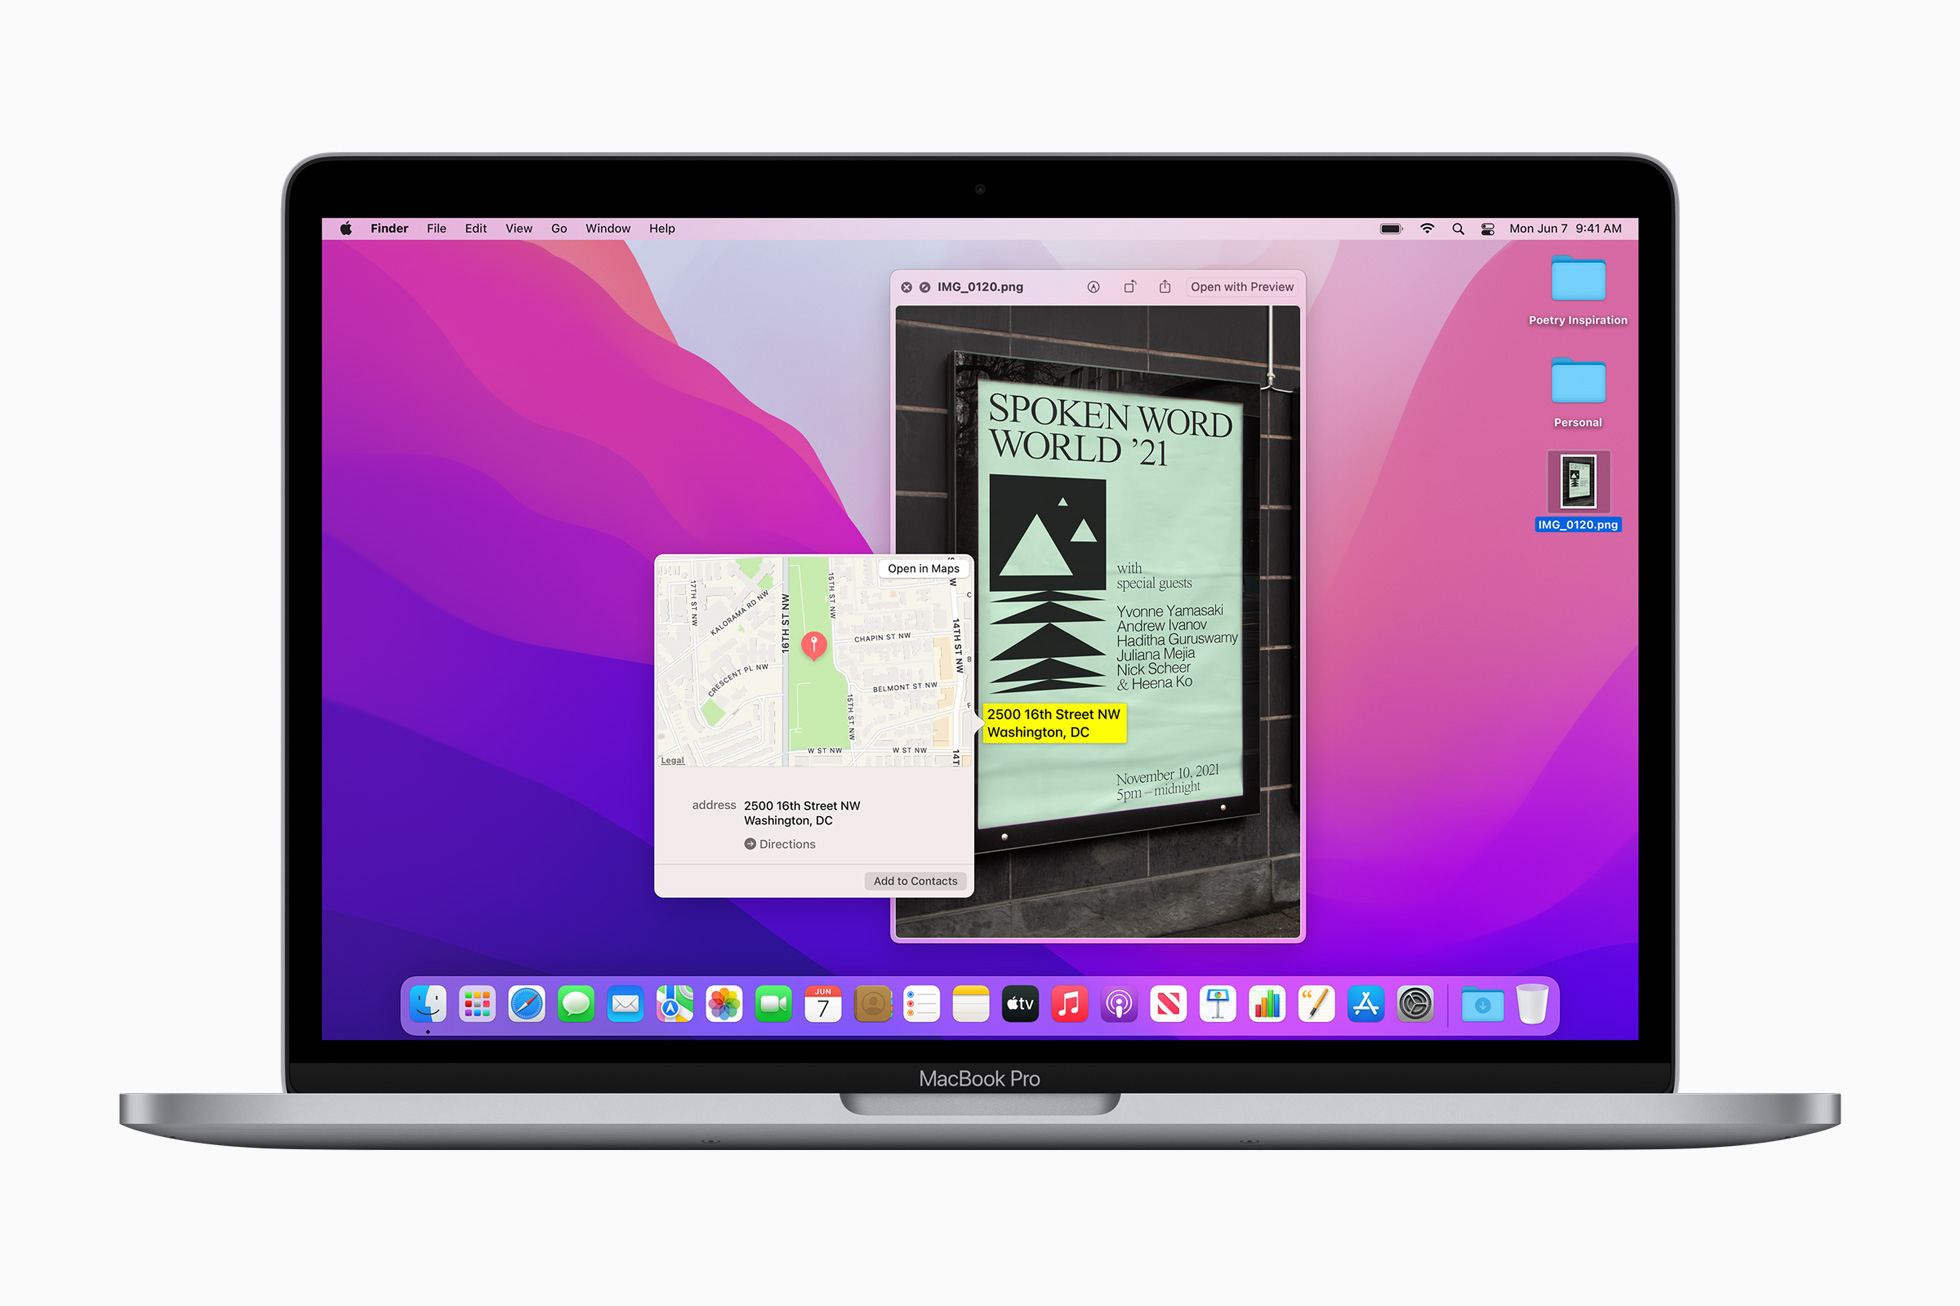 download the last version for mac Monterey